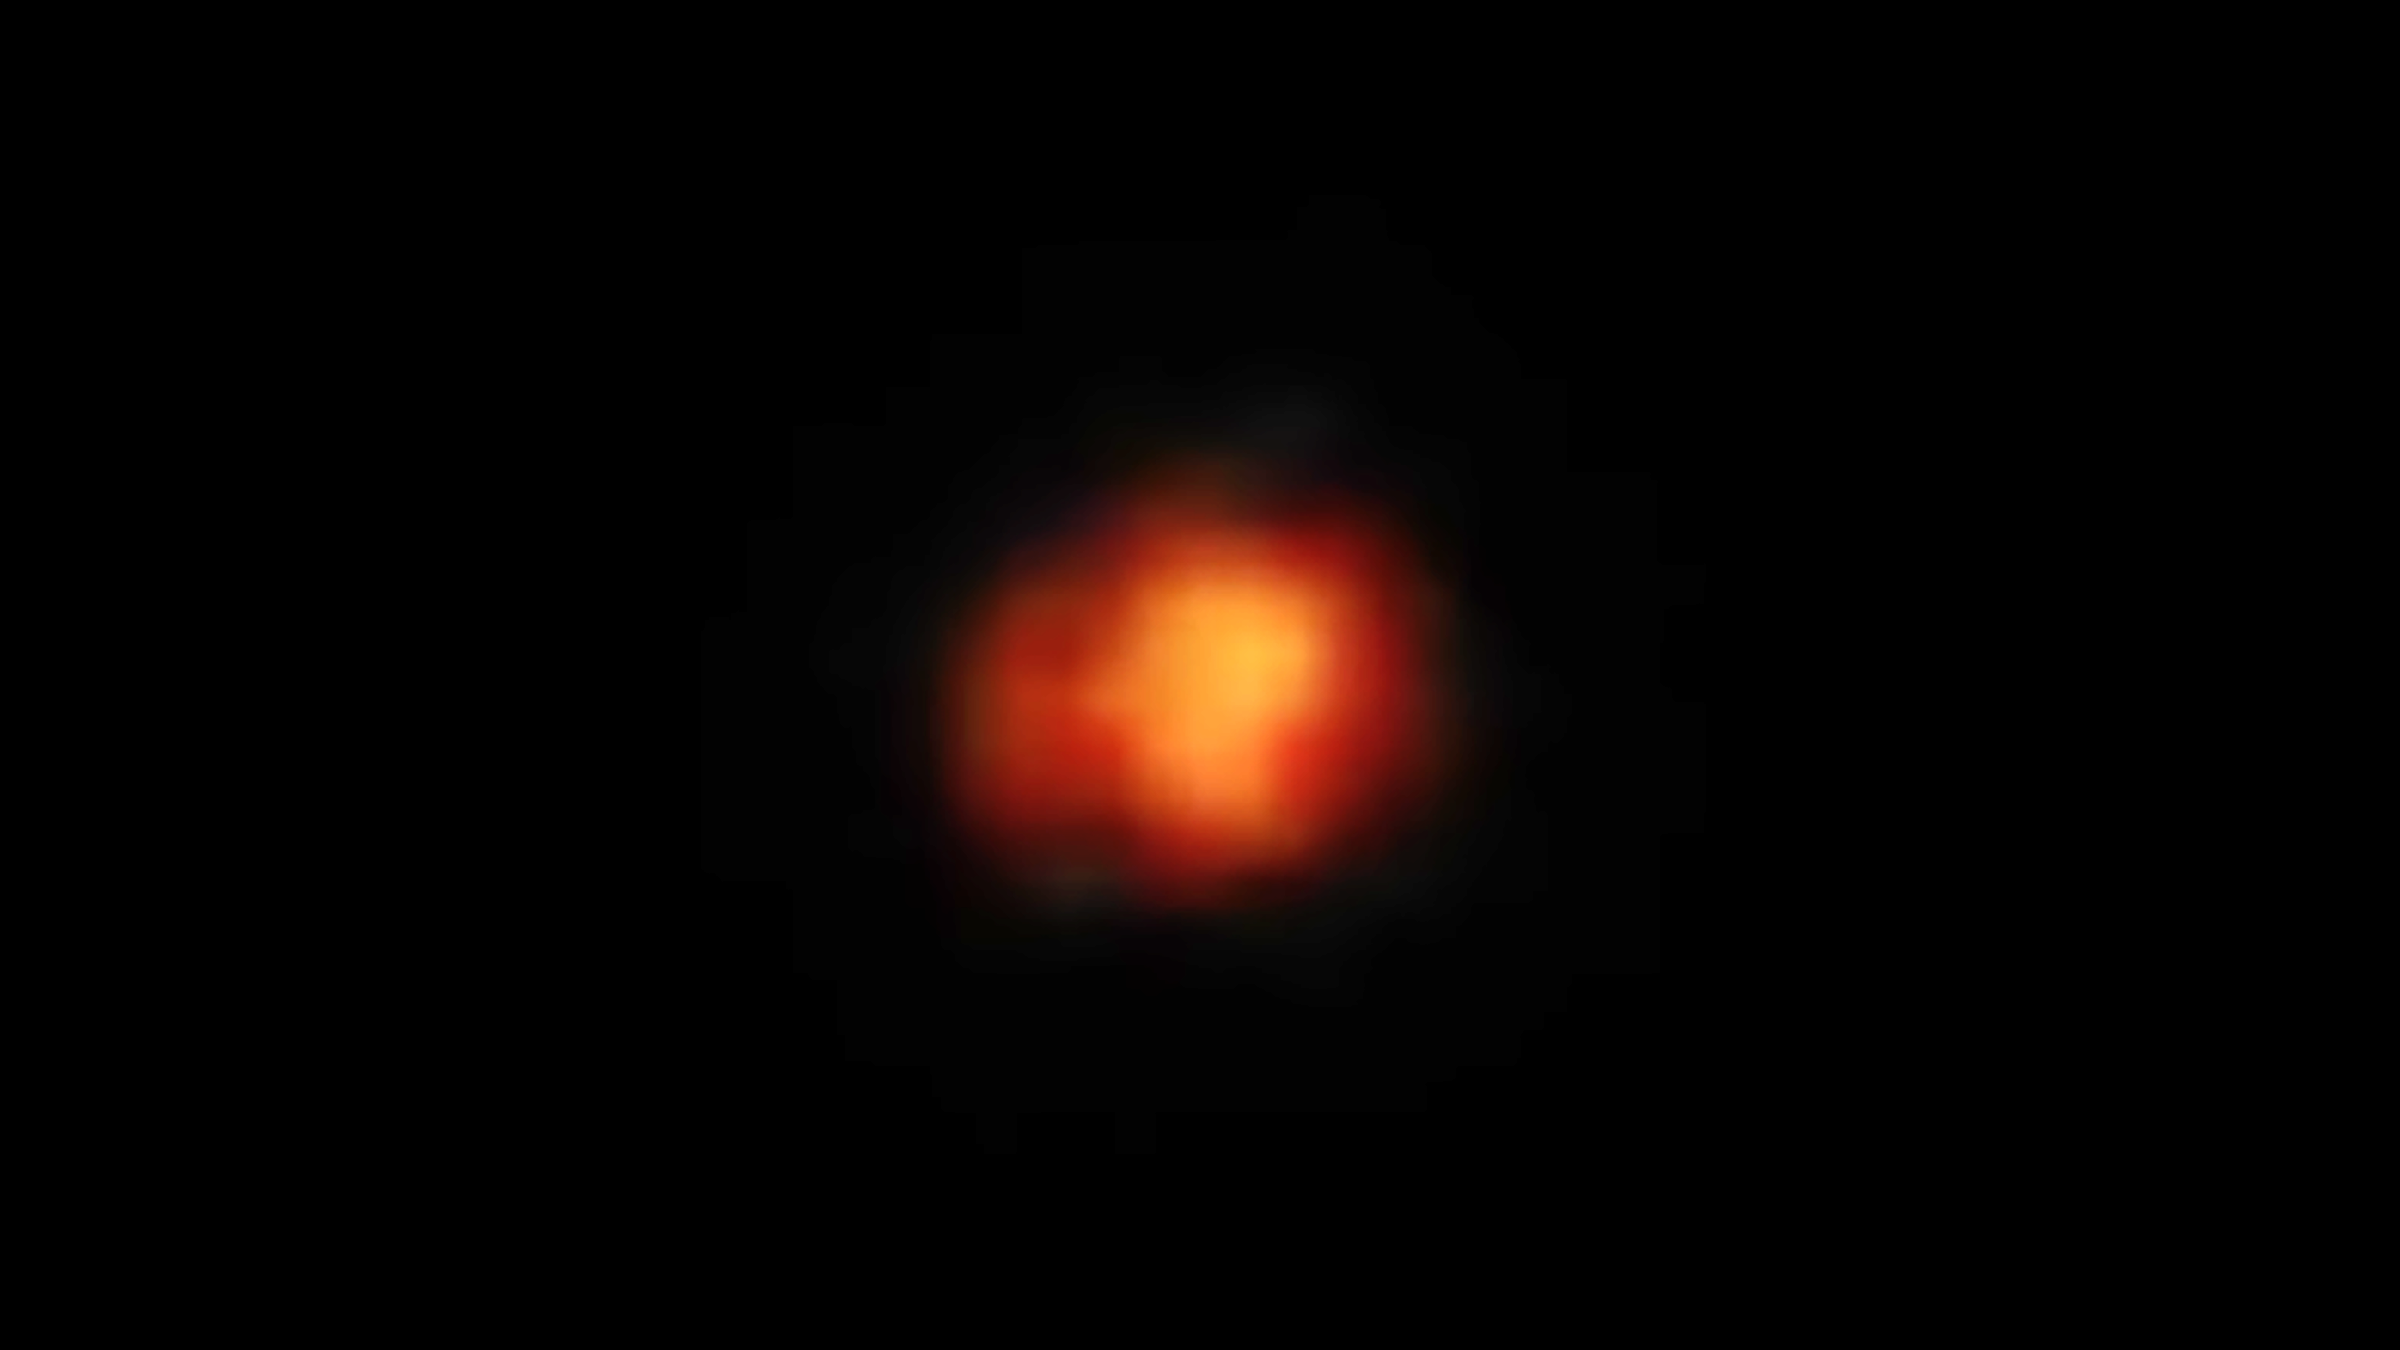 An orange-red blob in the center of a black background